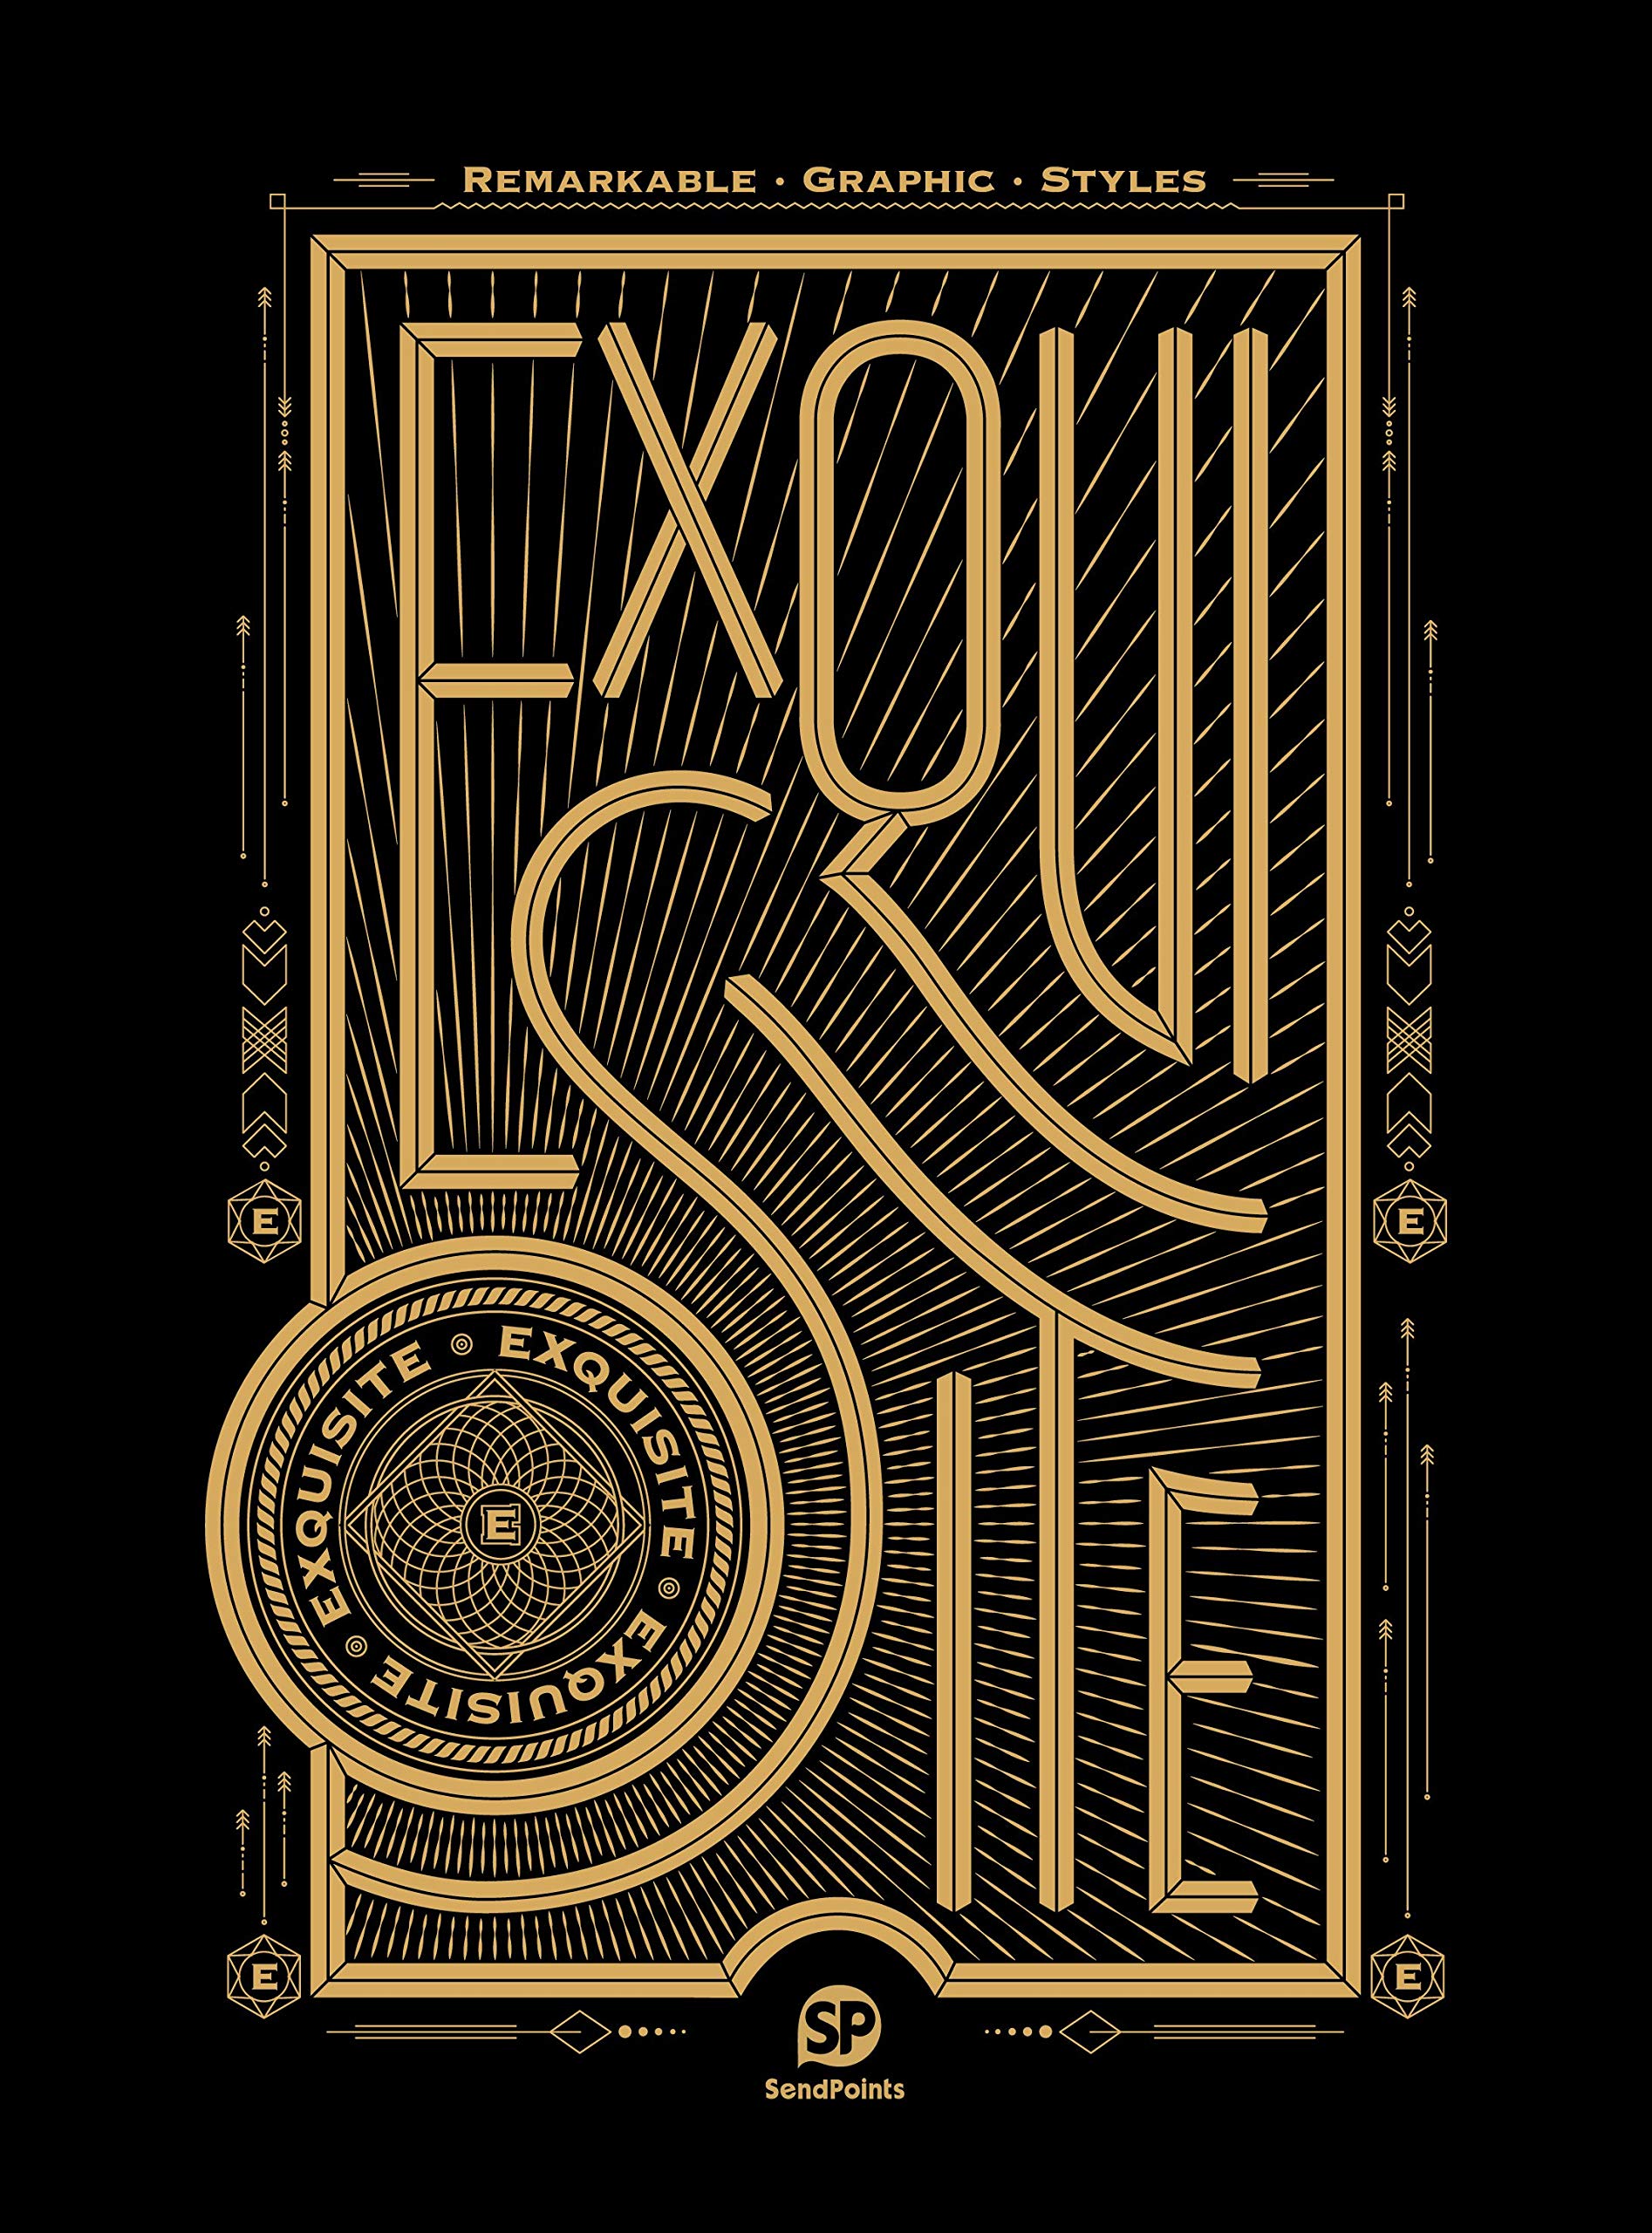 Exquisite: Remarkable Graphic Styles Series 